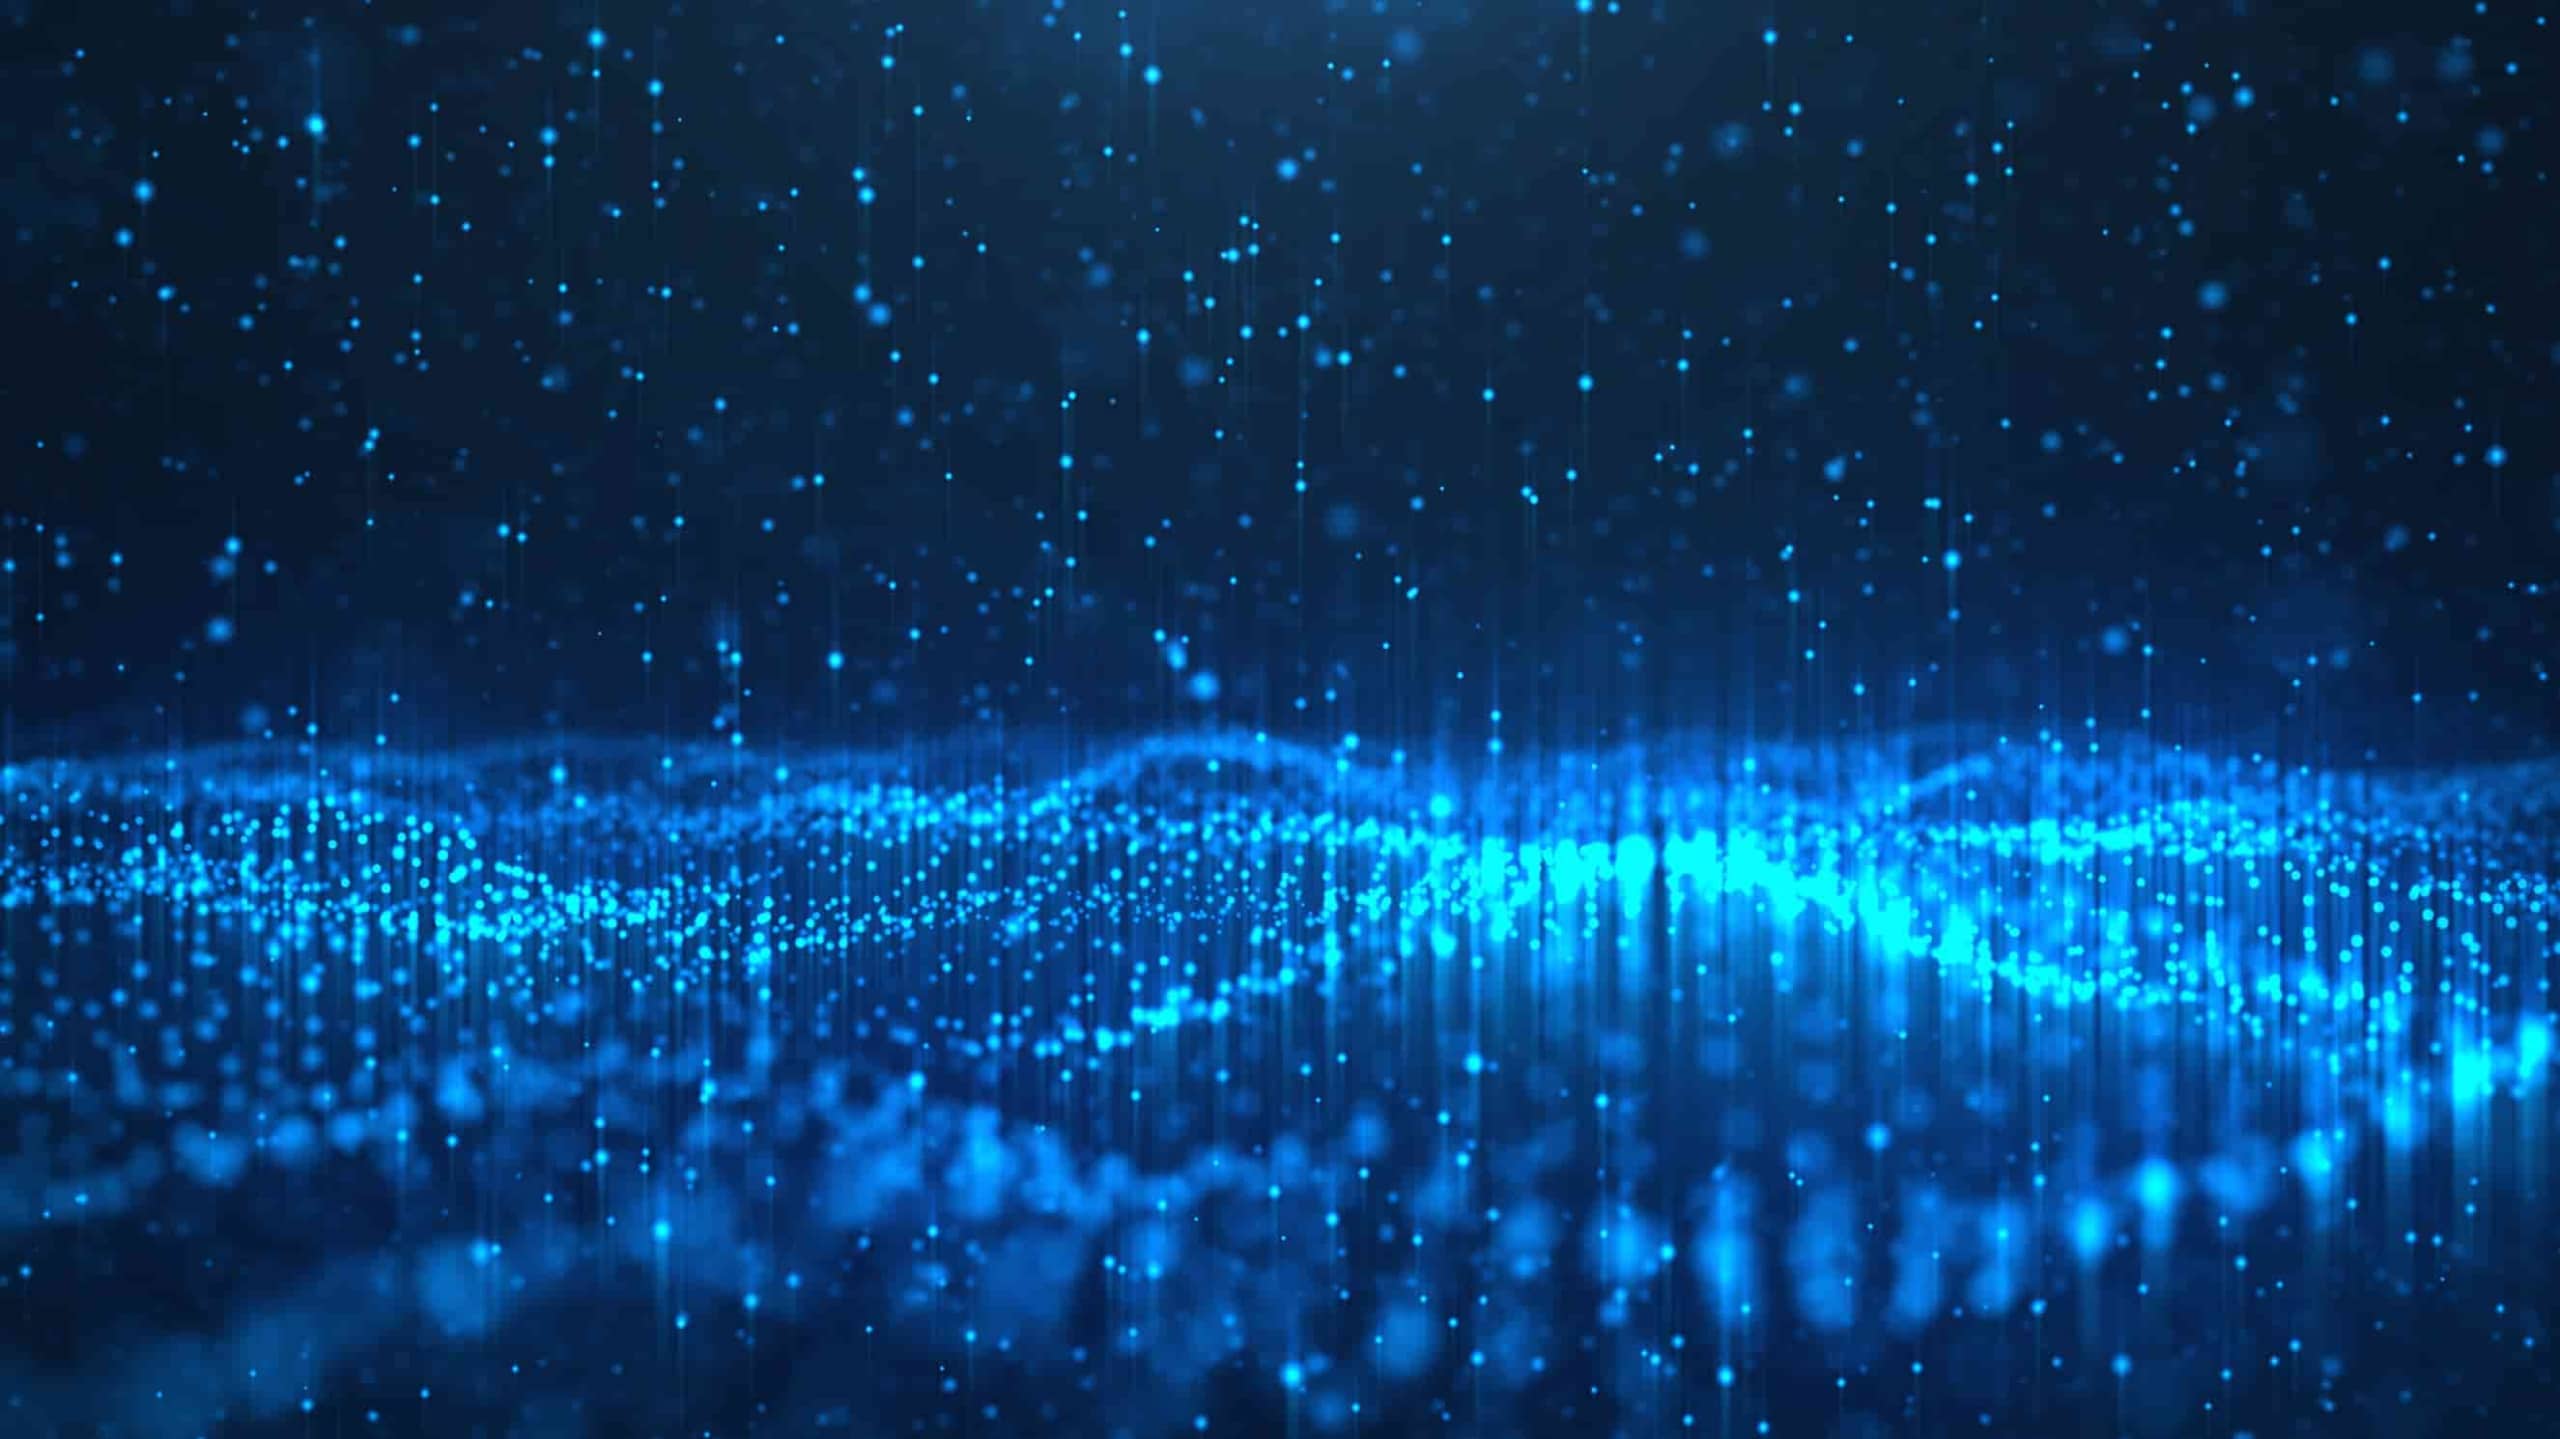 Digital illustration of a blue network grid with numerous glowing dots connected by lines, simulating a high-tech data network with particles raining down.